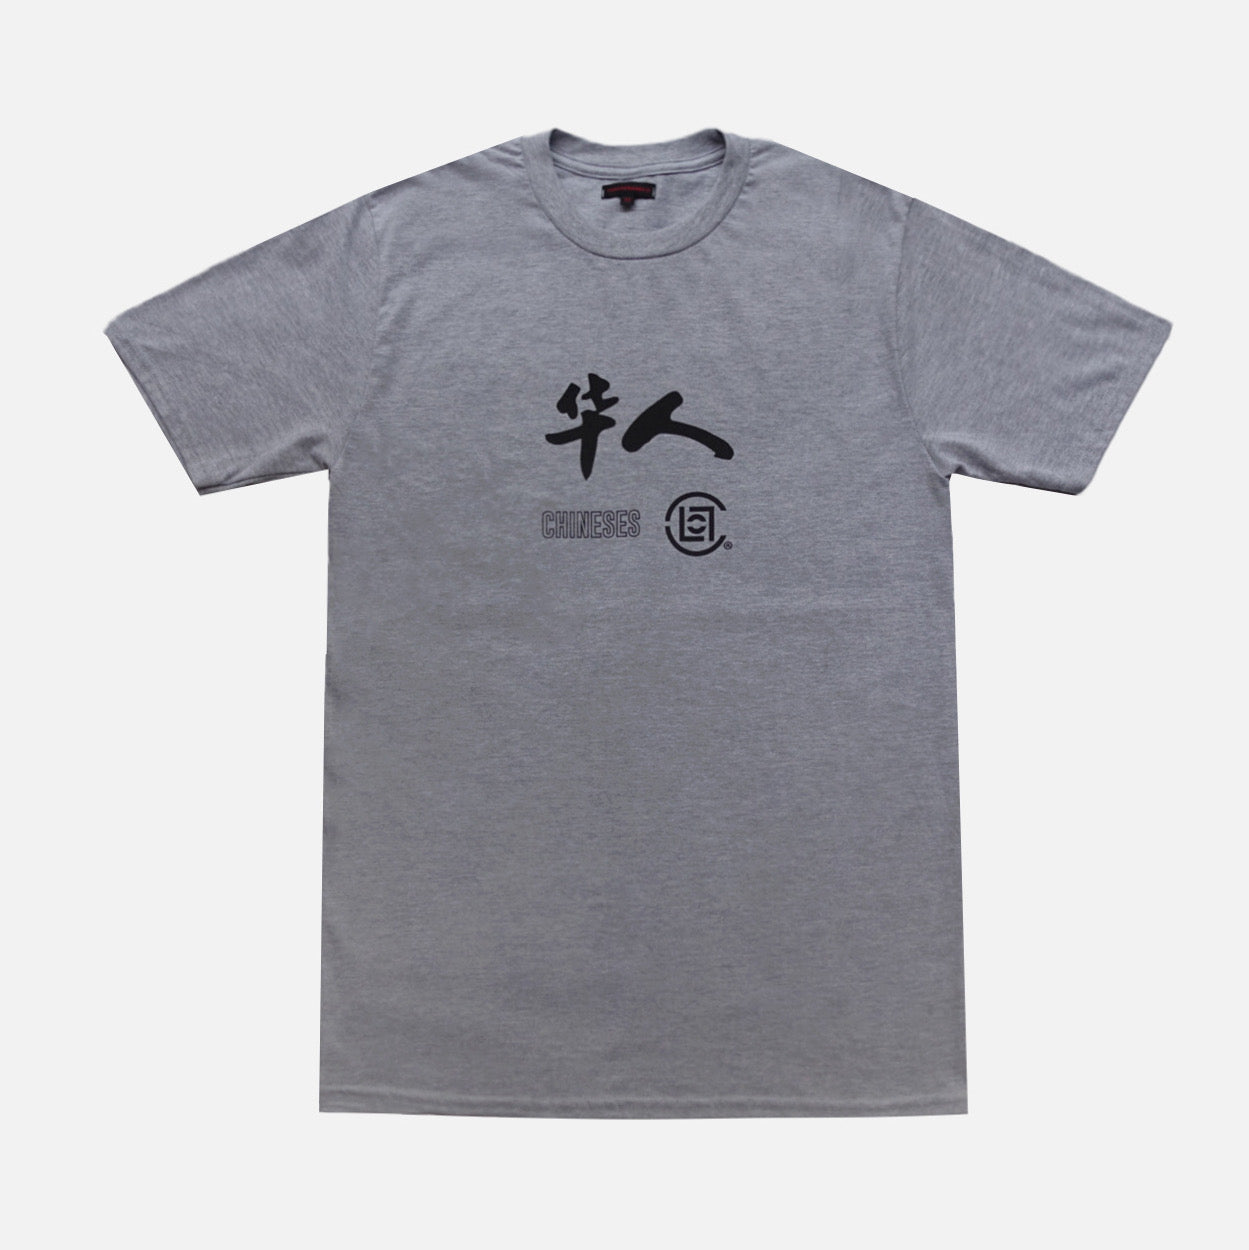 Clot 华人 Grey T-Shirt - Shop Streetwear, Sneakers, Slippers and Gifts online | Malaysia - The Factory KL